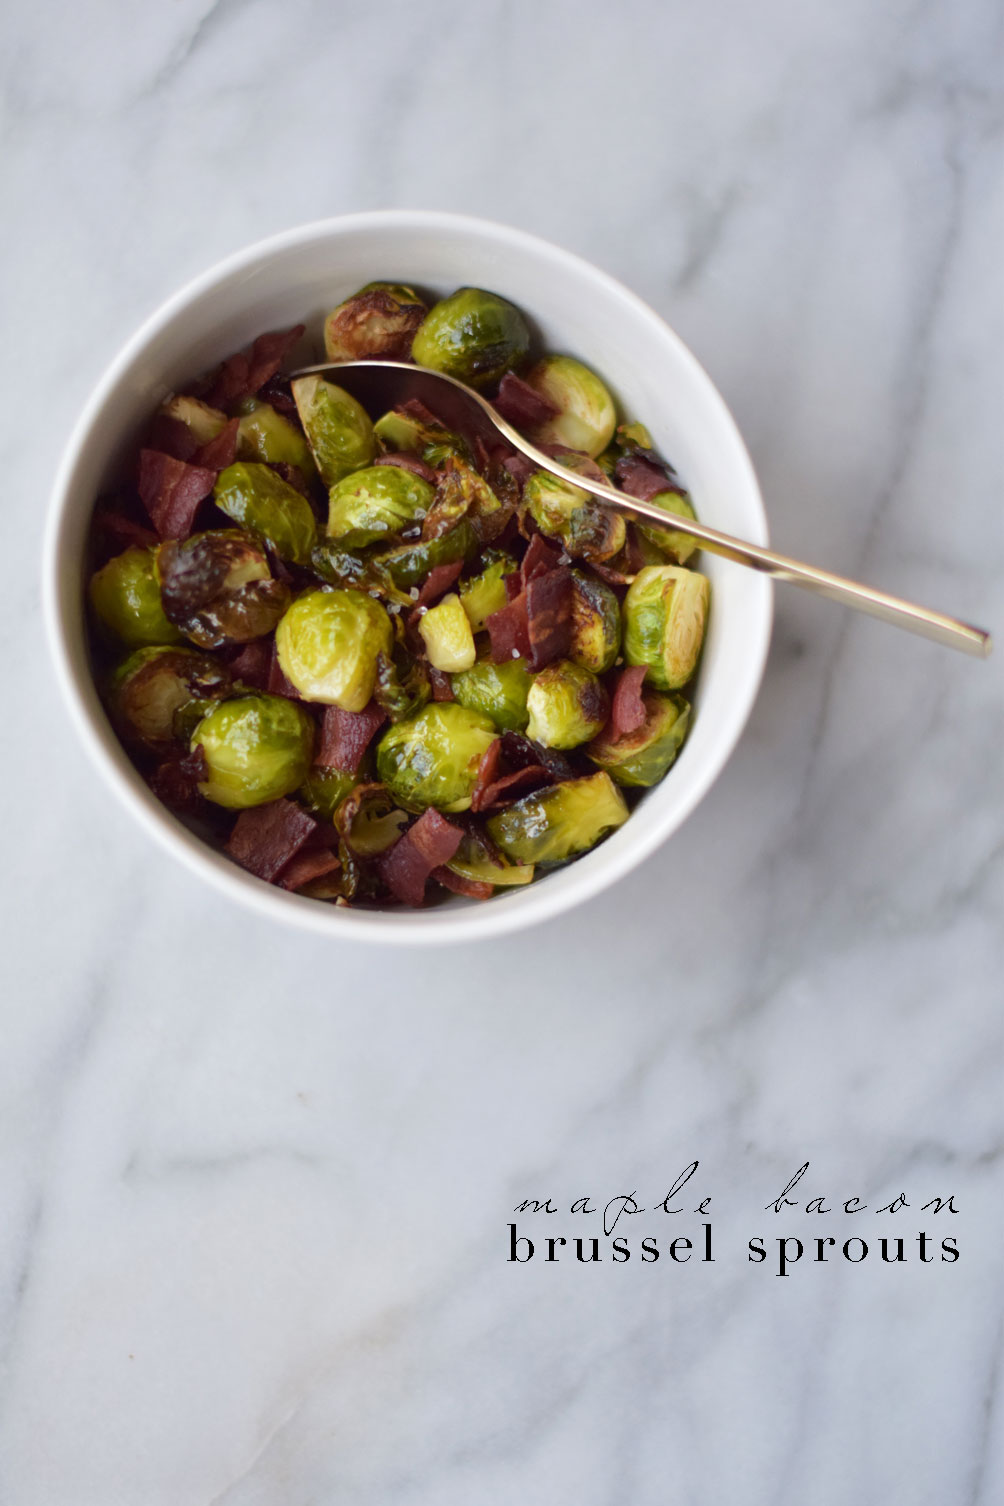 easy and healthy recipe for maple bacon brussel sprouts from Leslie Musser on one brass fox